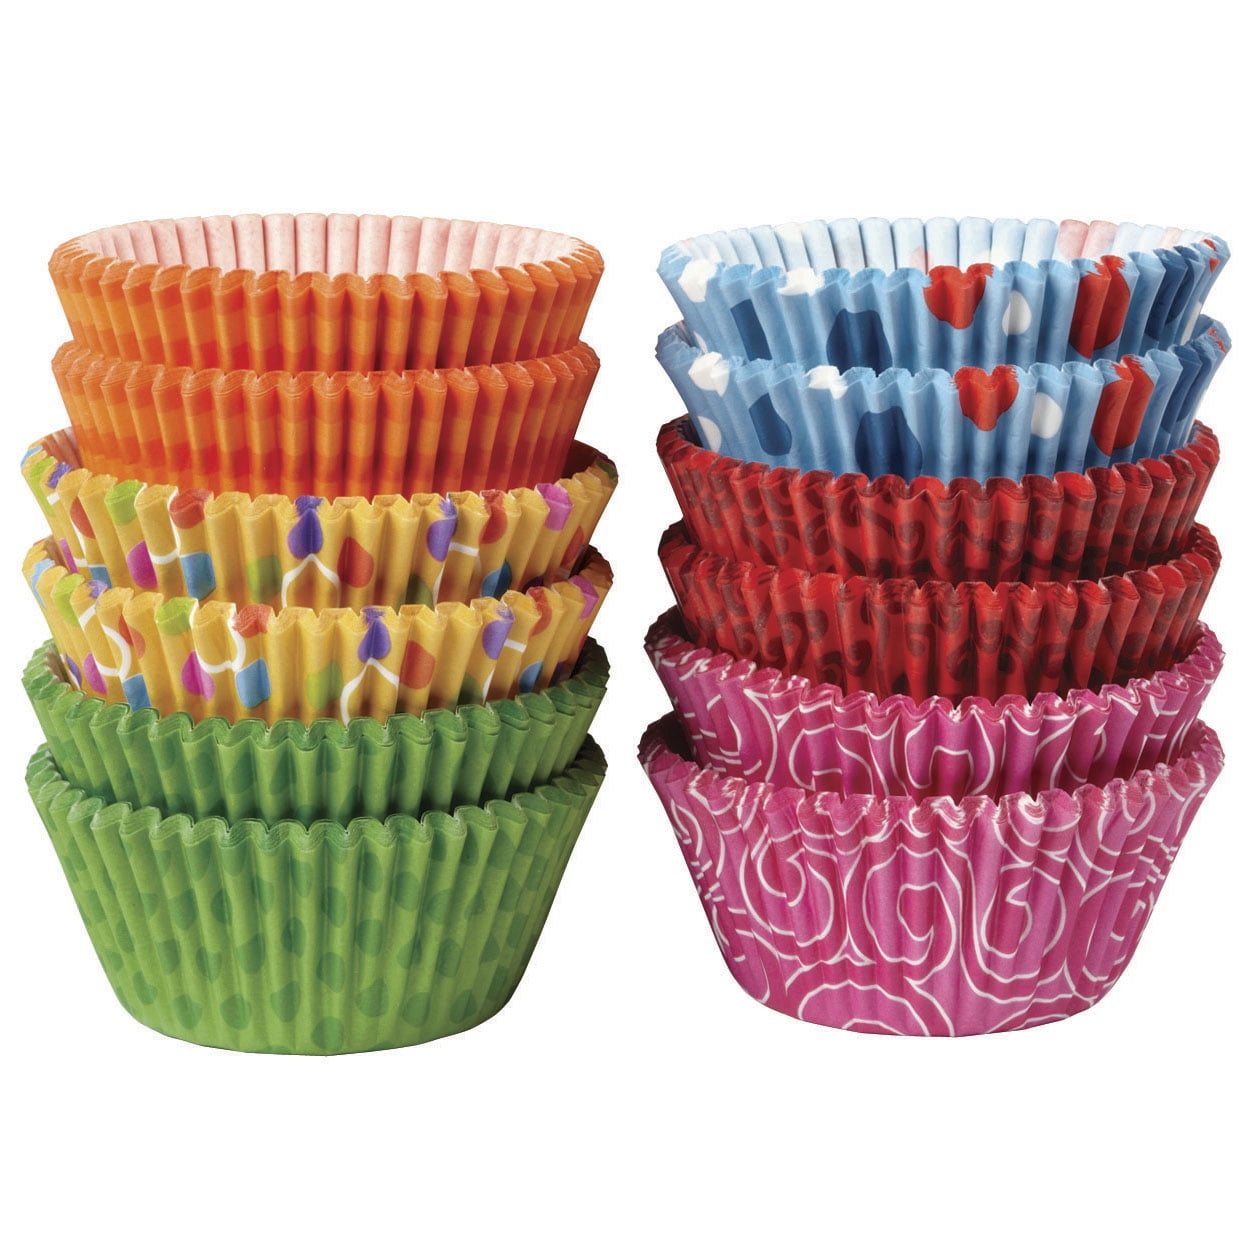 300 Colorful Mini Cupcake Liners Muffin Case Cake Paper Baking Cups Color Random